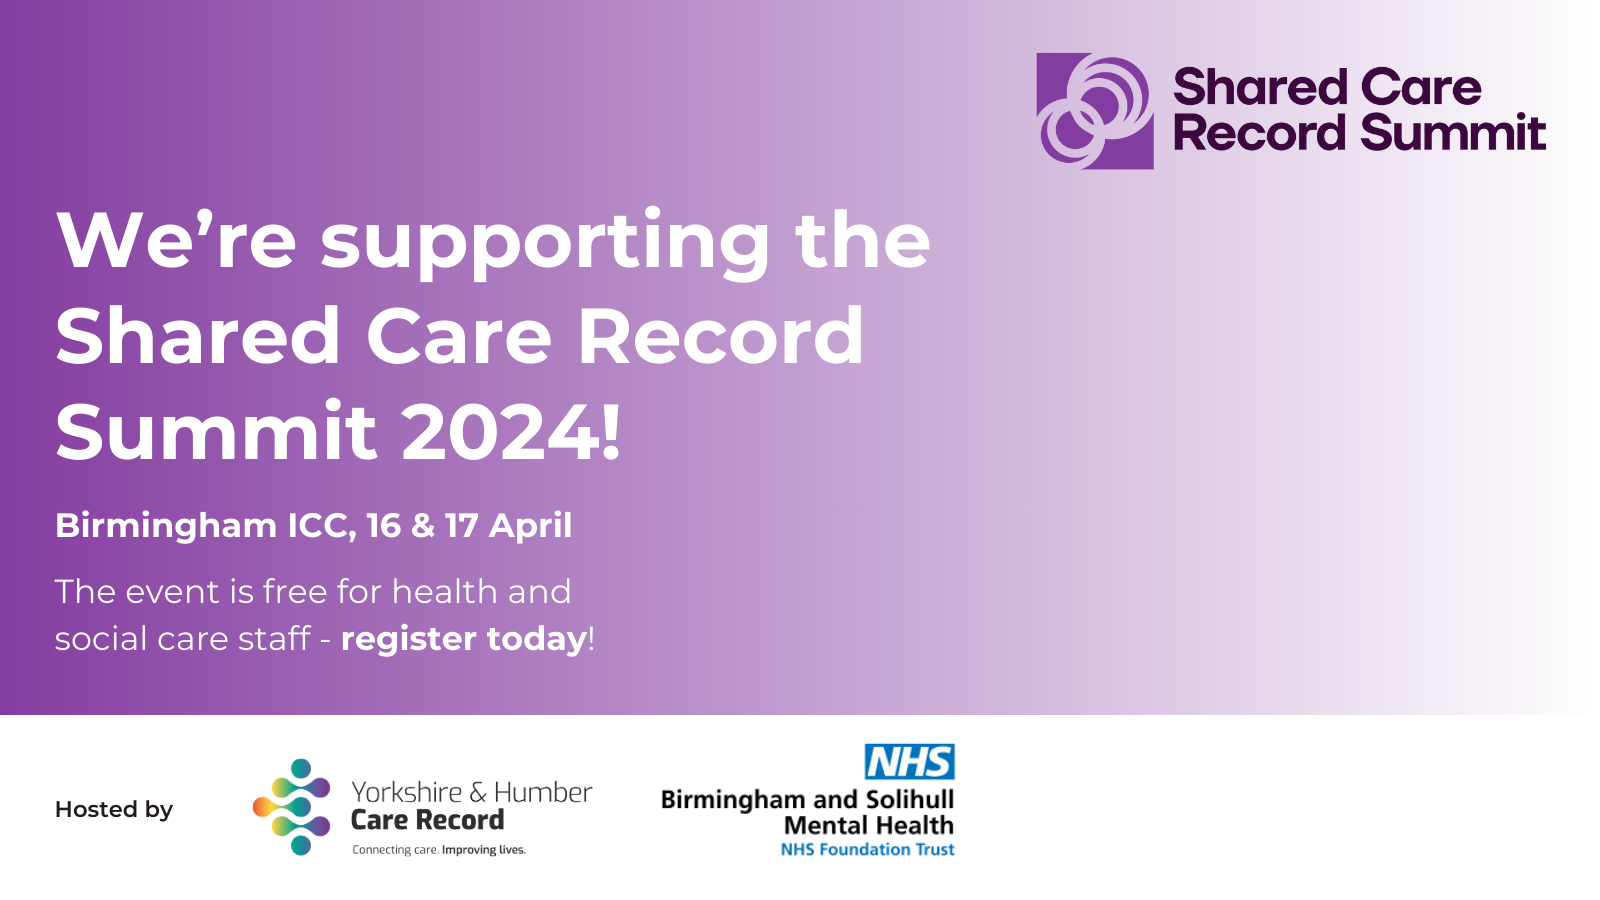 Shared Care Record Summit 2024